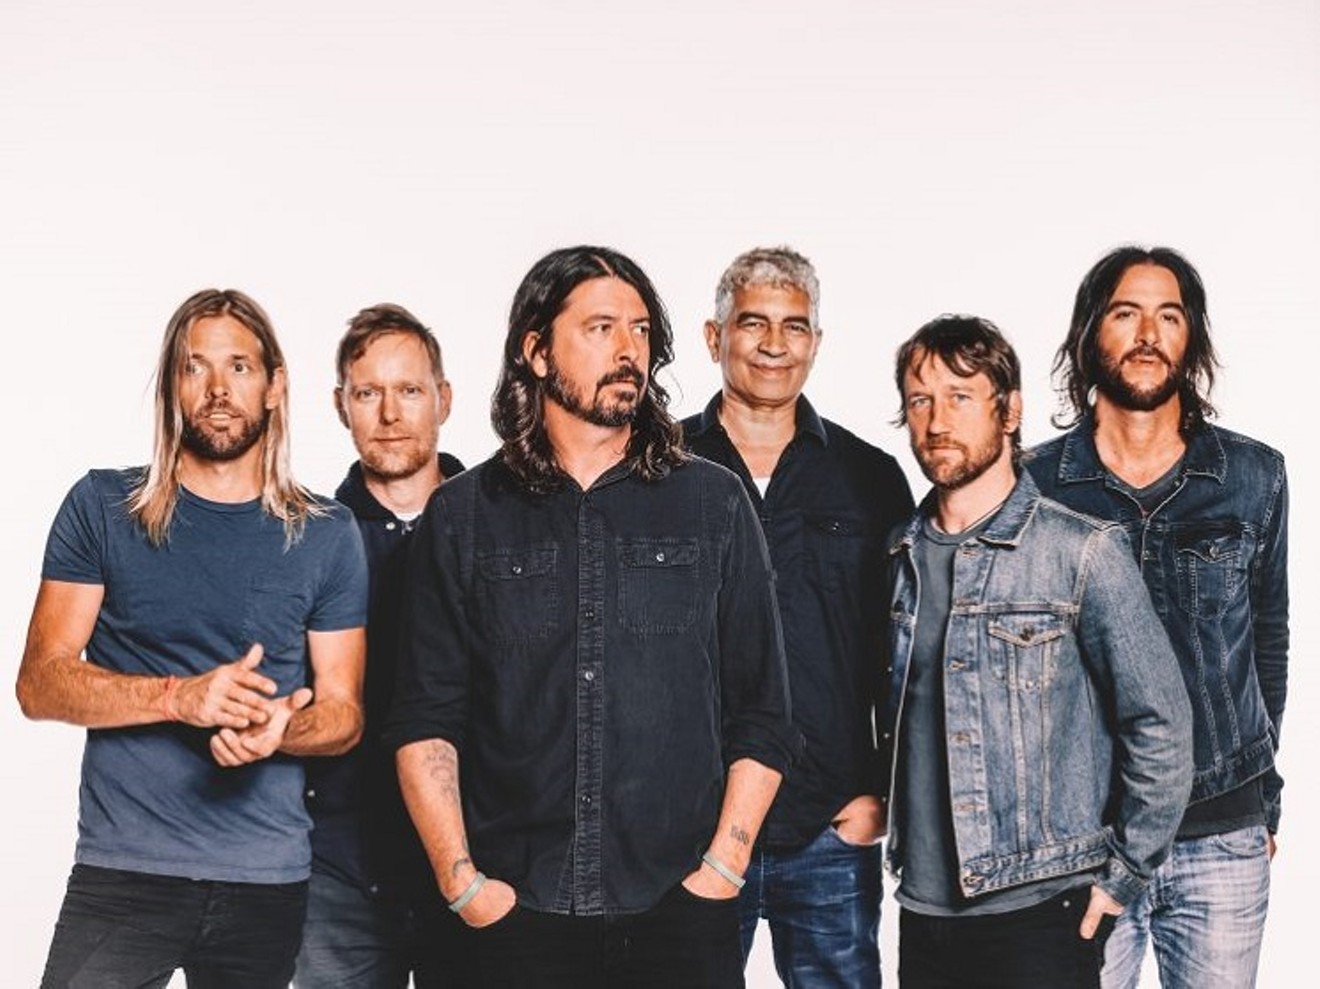 Foo Fighters play Cynthia Woods Mitchell Pavilion in The Woodlands on Thursday night, with openers The Struts.